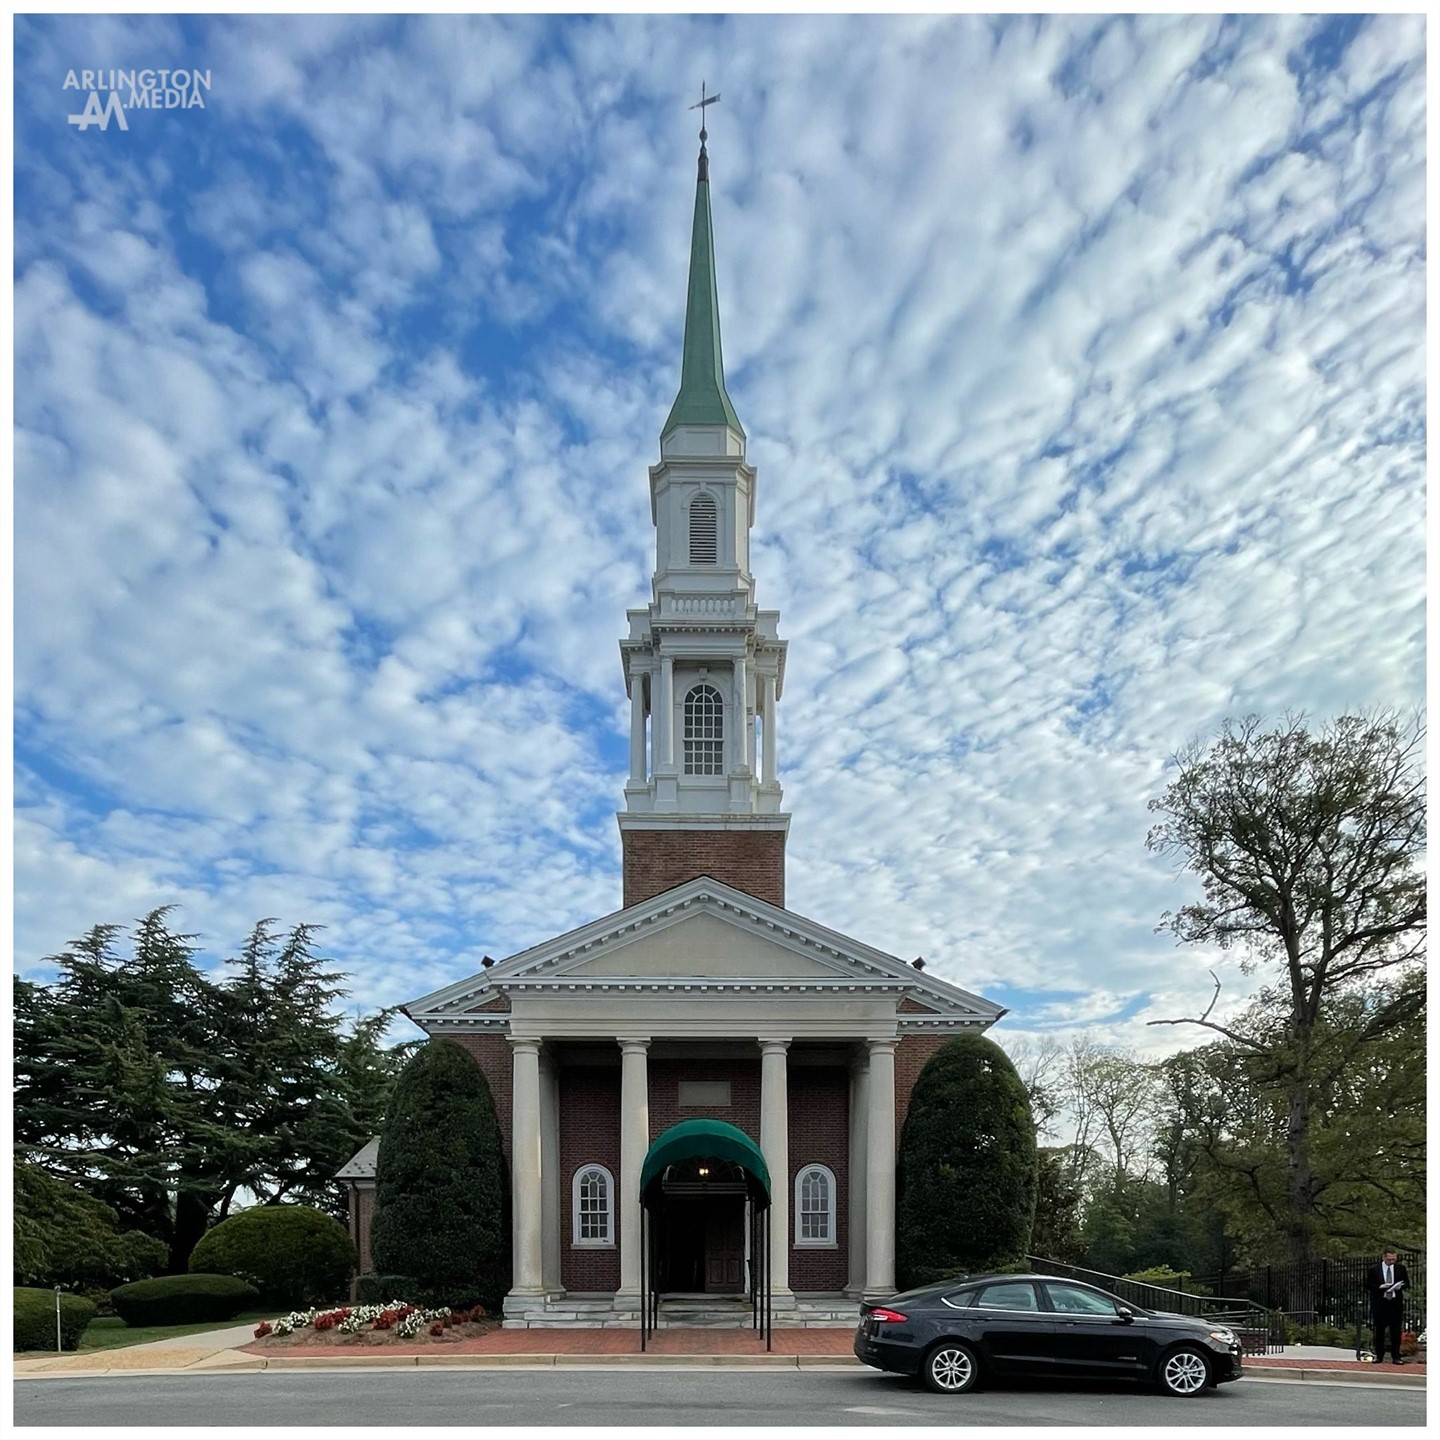 The Old Post Chapel at Fort Myer before a service at Arlington National Cemetery as captured by our @arlingtonmedia team.

“The Quartermaster Corps of the Army designed and constructed this chapel at Fort Myer and also built the new entrance gateway to the National Cemetery, completed in 1935.  The chapel is used for religious services at the post and also for rites in the cemetery. It is a brick building with wood cornice, an entrance porch of four stone columns, and a wood spire which rises to a height of 97 feet.

A 1998 Technical Report by the US Army Corps of Engineers notes that this construction project was part of a host of “New Deal programs [that]…resulted in a construction boom on Army installations. Installations increased in size as training areas expanded. 

The Historic Fort Myer website explains that “over time,…this one building would become the iconic representation when one thought about Fort Myer. It was the focal point proudly occupying the center of the garrison’s insignia. In addition to providing a place for worship for the Fort Myer Military community, it hosted many weddings and also provided the starting place for many of the final honors which would end in adjacent Arlington National Cemetery."

Today, this Old Post Chapel is still a site for worship, weddings, and many funerals that honor fallen veterans being buried at Arlington National Cemetery.